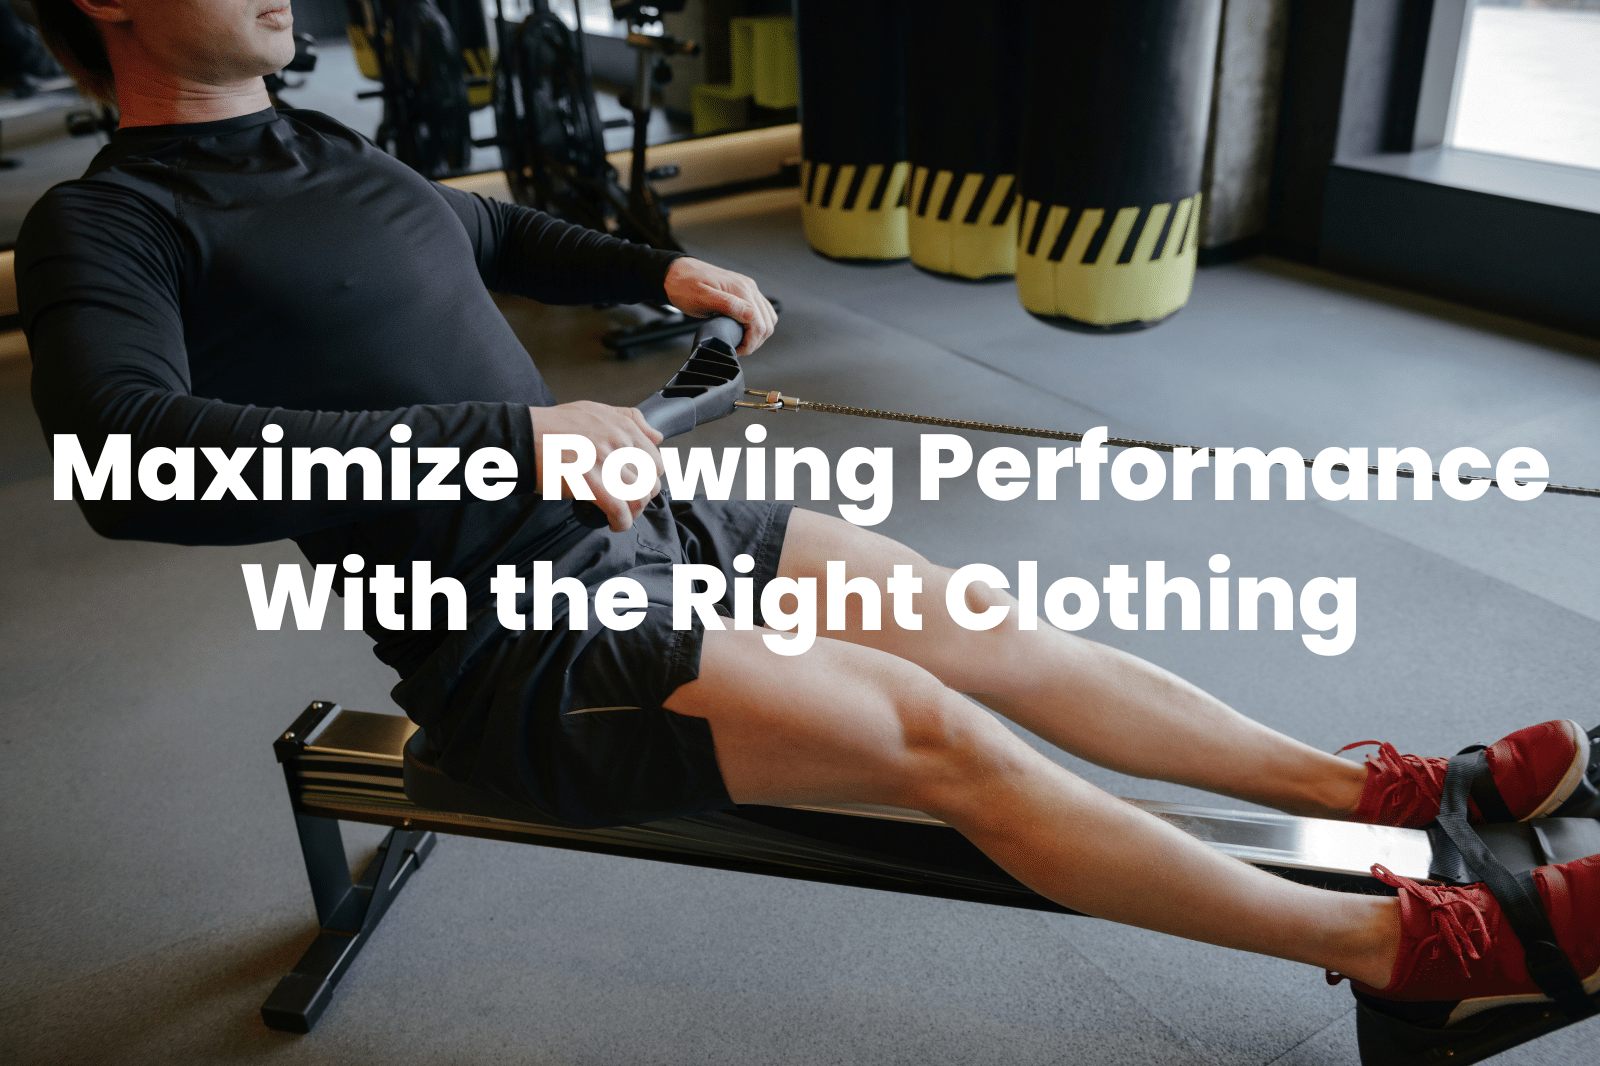 rowing performance